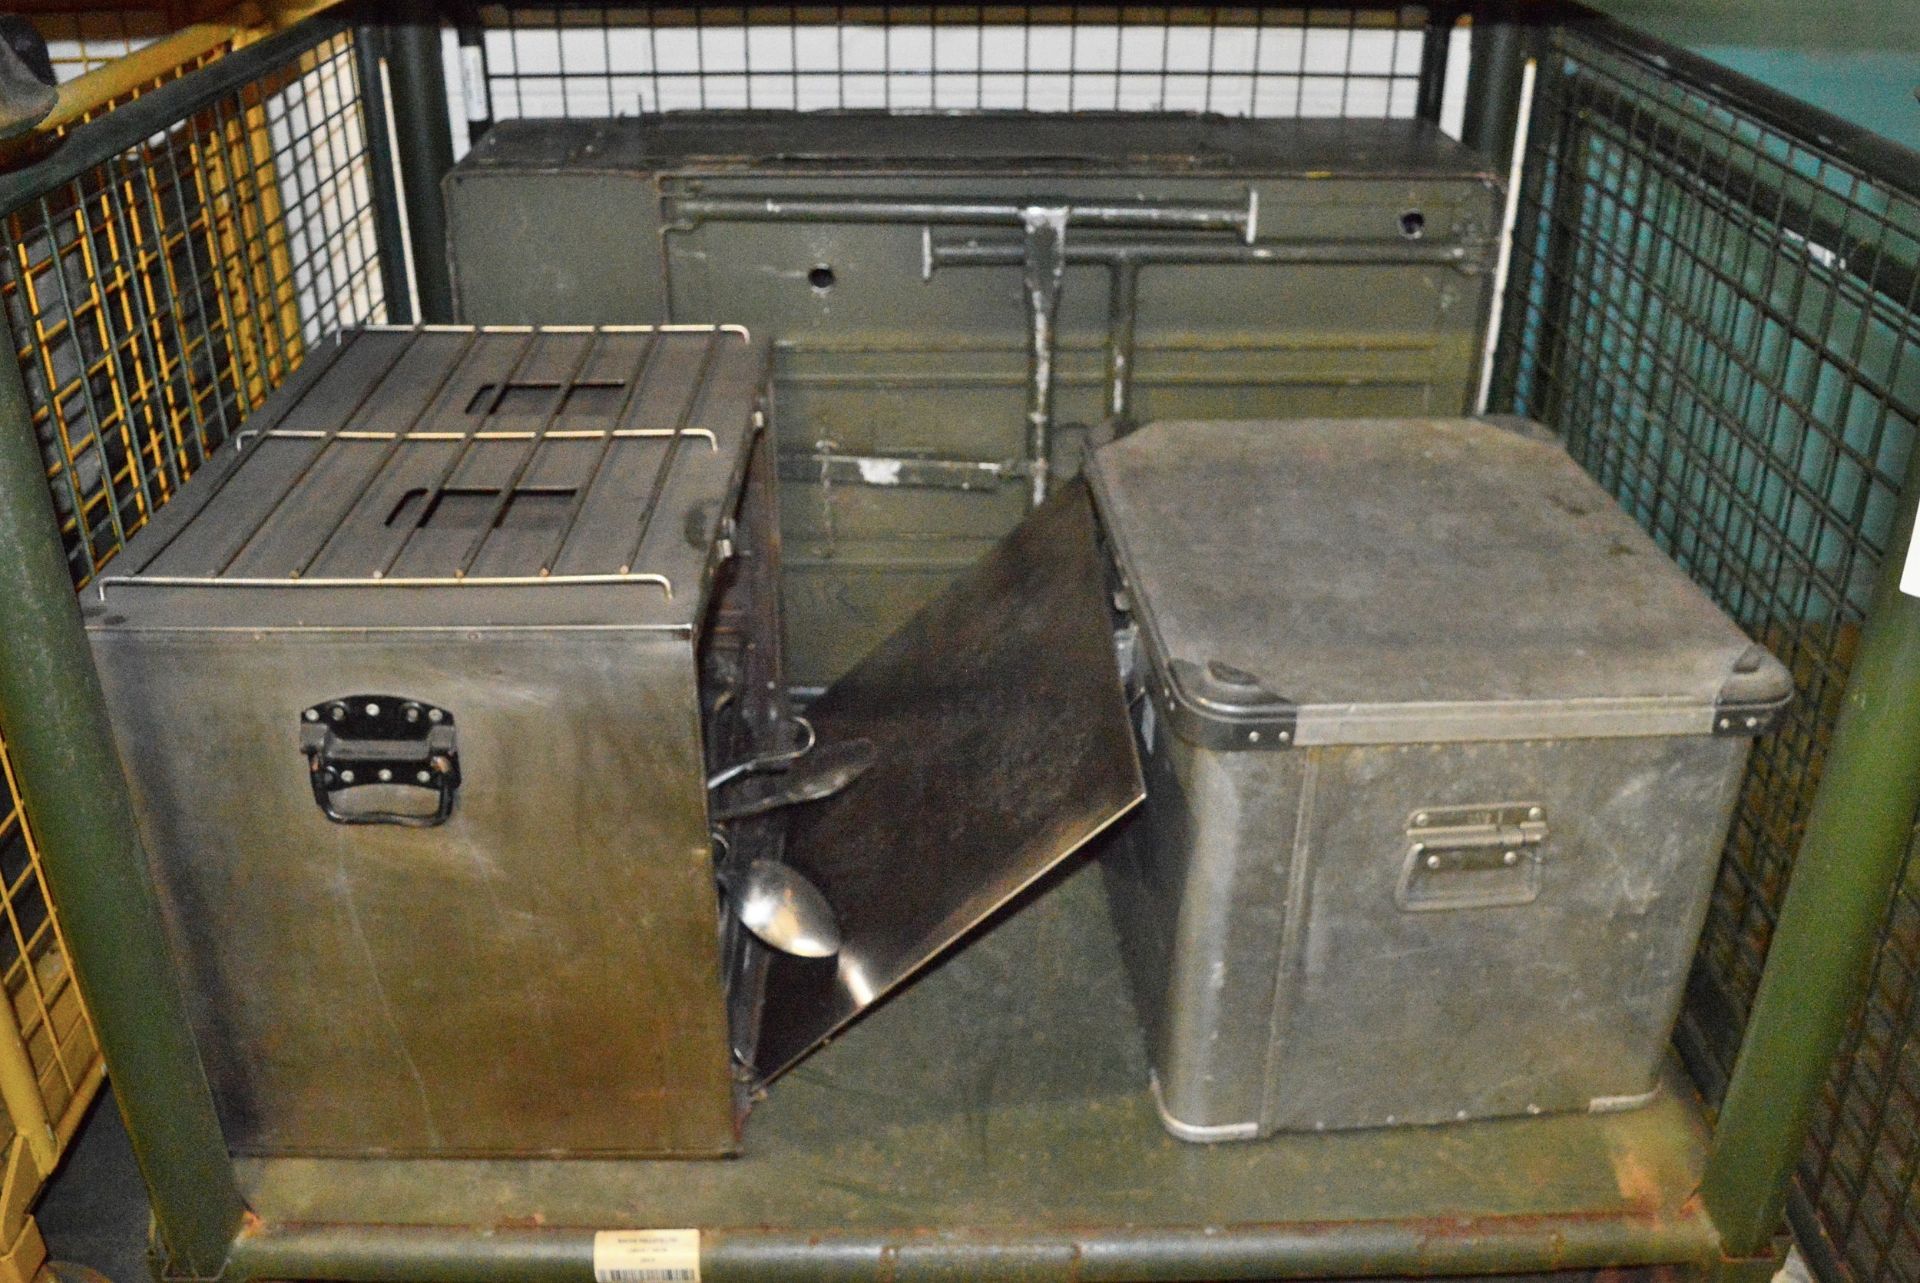 Field Kitchen set - cooker, oven, utensil set in carry box, norweigen food boxes, accessor - Image 4 of 5